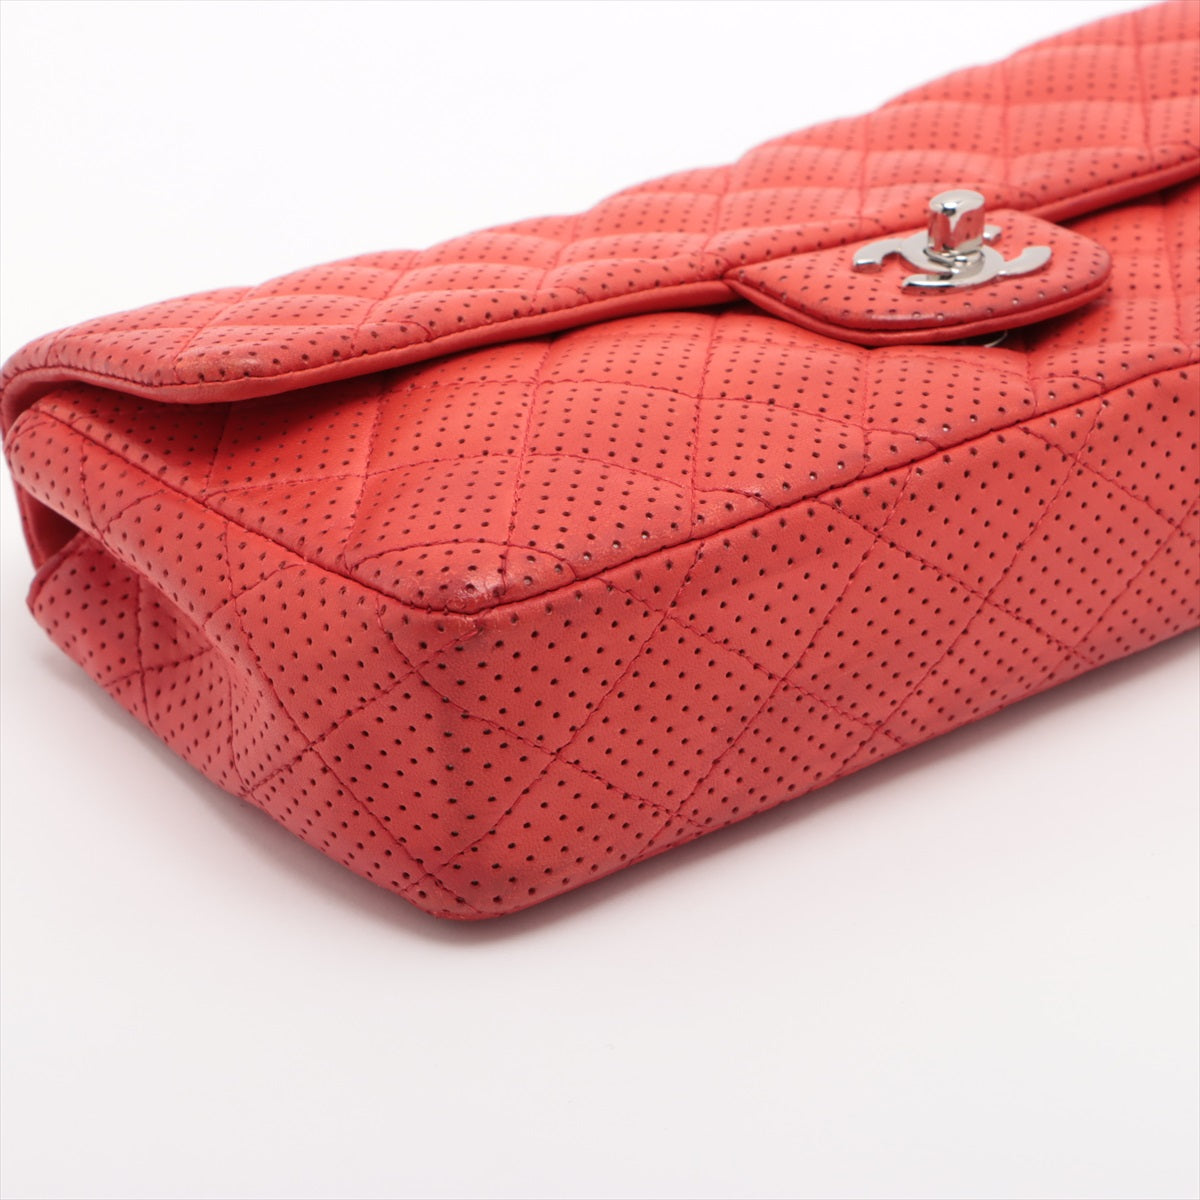 Chanel Matrasse Single Flap Single Chain Bag Red Silver  11th